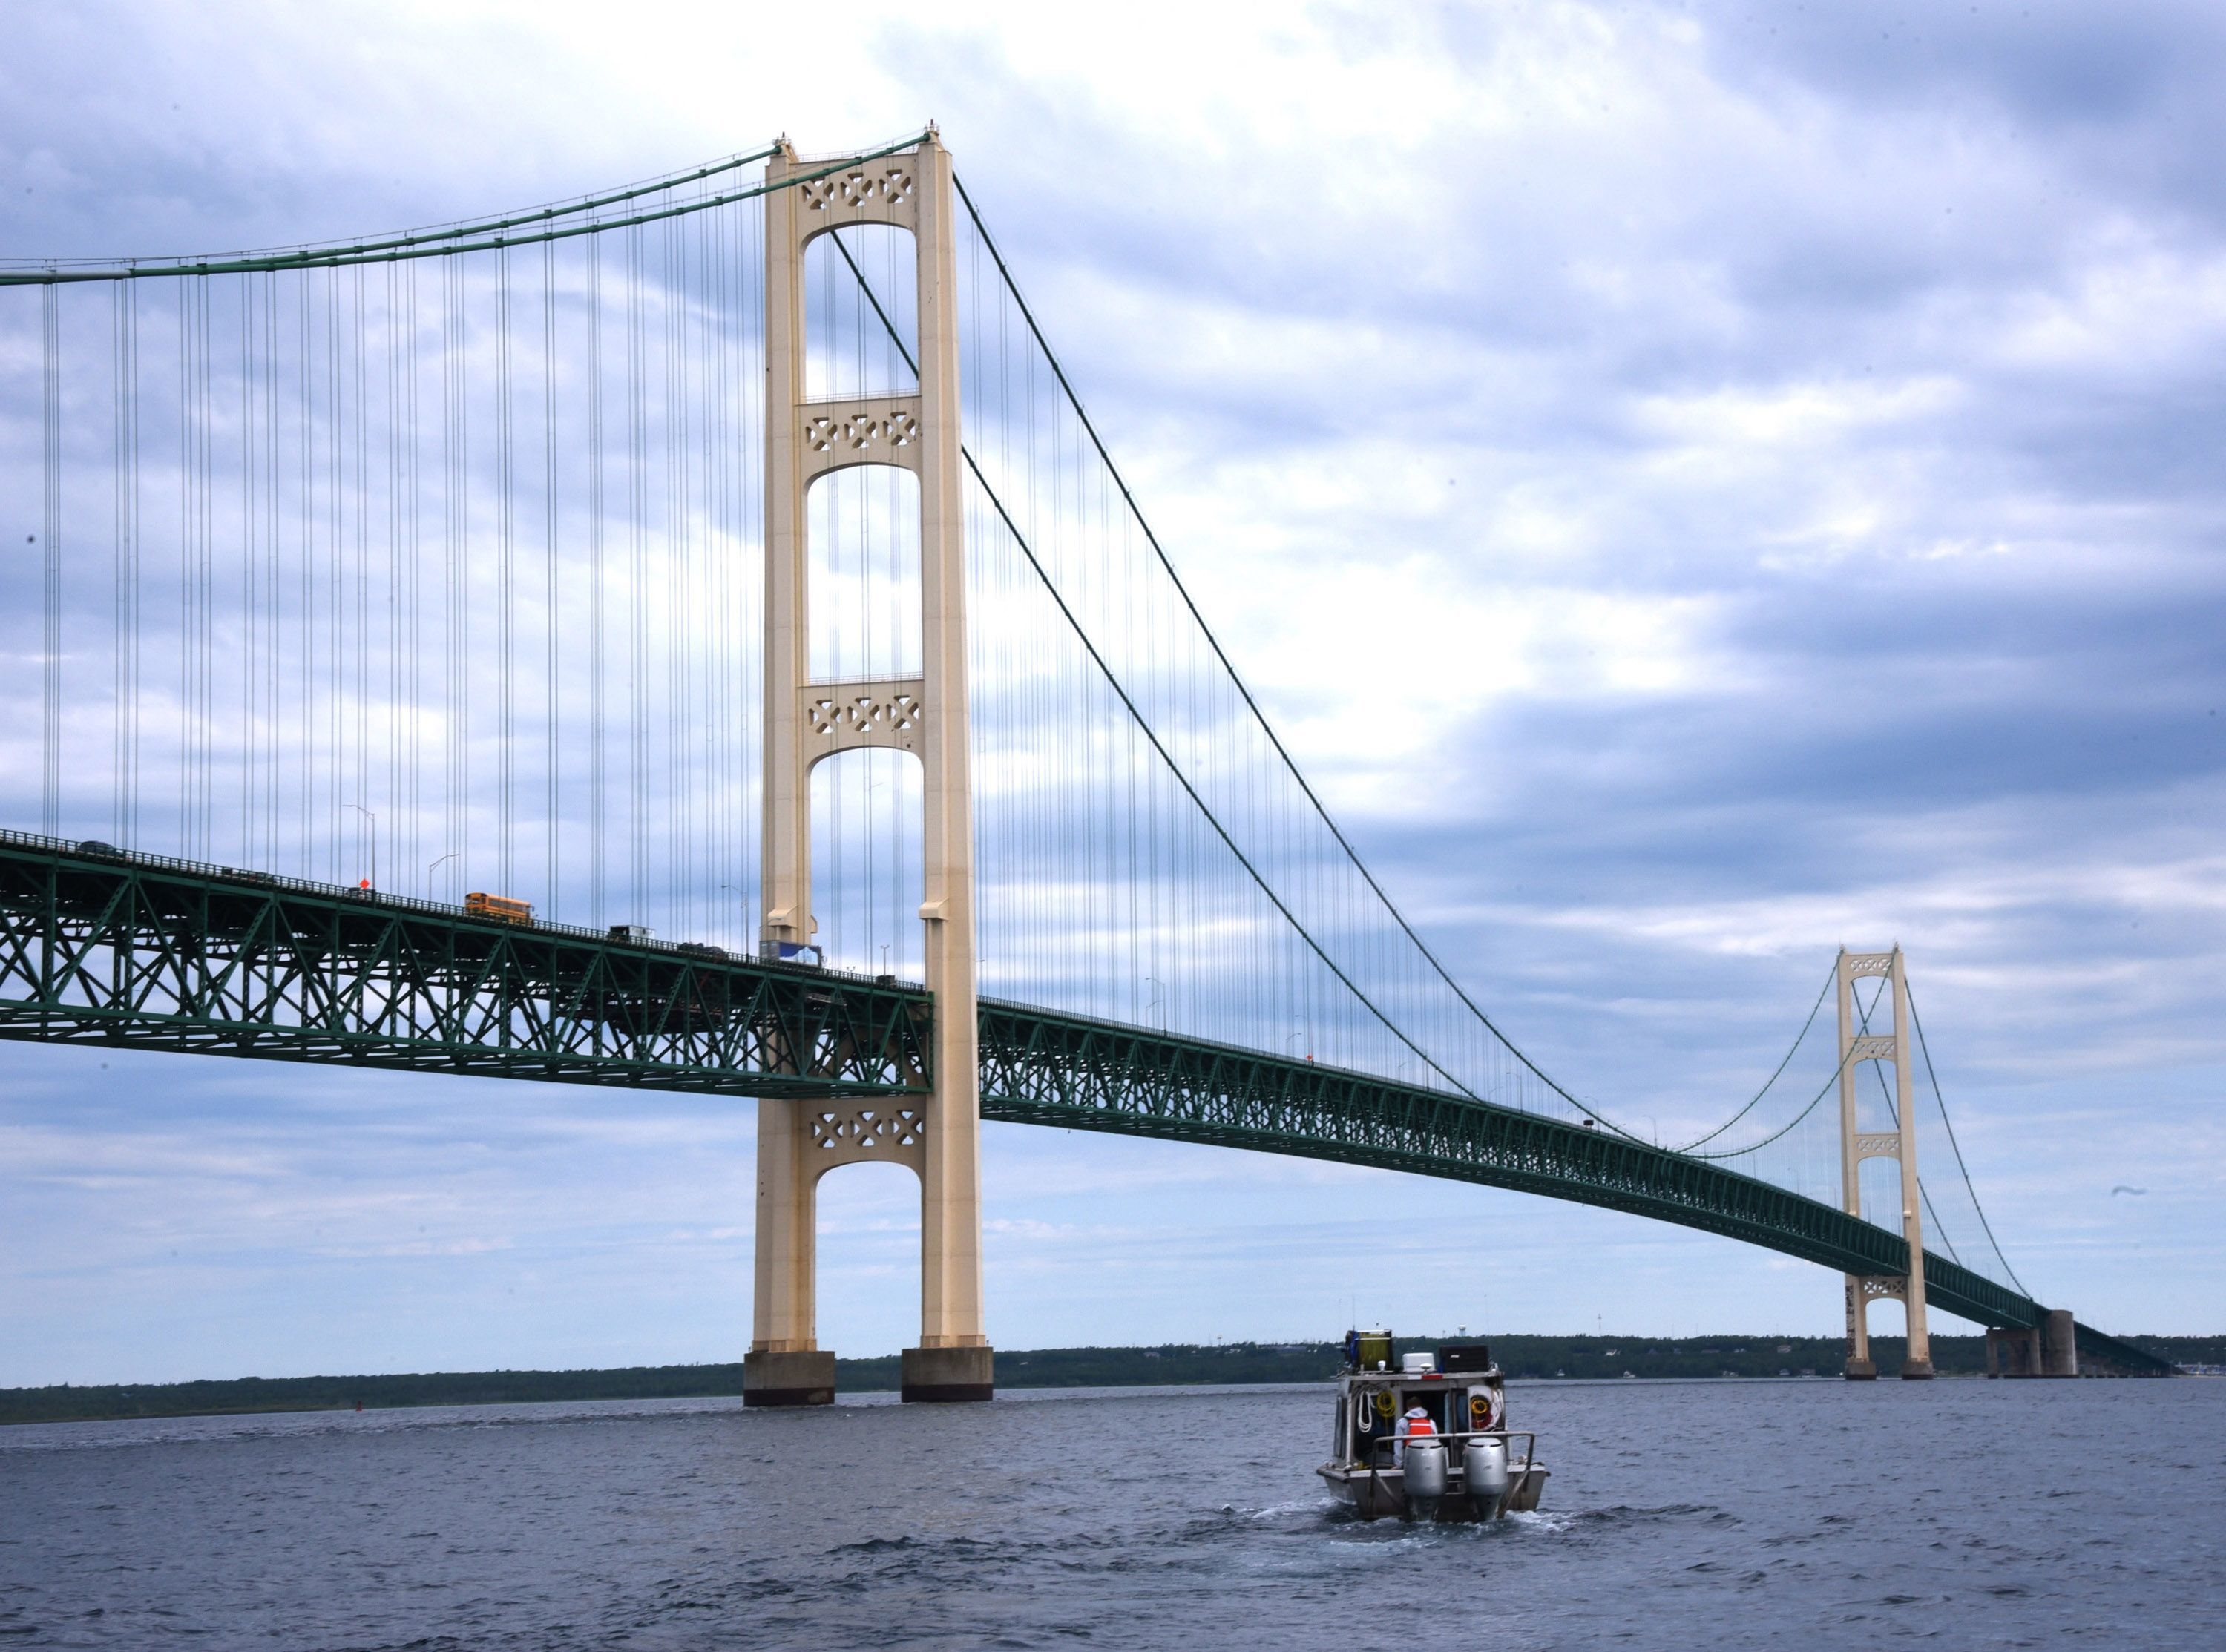 Line 5 transports about 23 million gallons of oil and natural gas a day through the Upper Peninsula, including a four-mile stretch through the Straits of Mackinac.